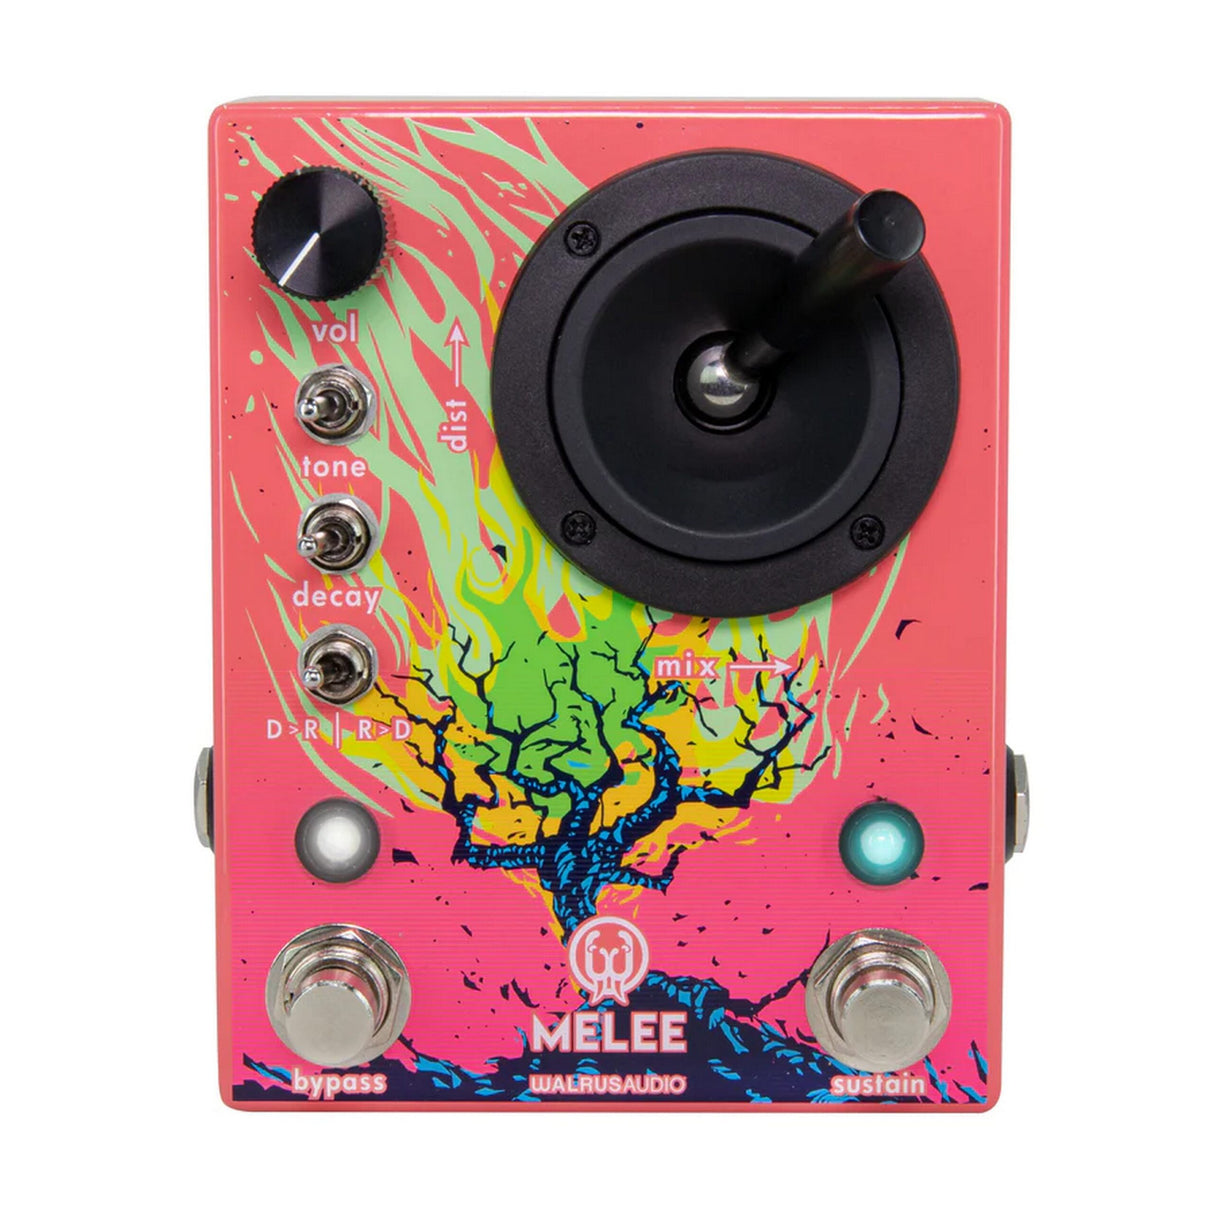 Walrus Melee Wall of Noise Distortion Reverb Combo Guitar Pedal